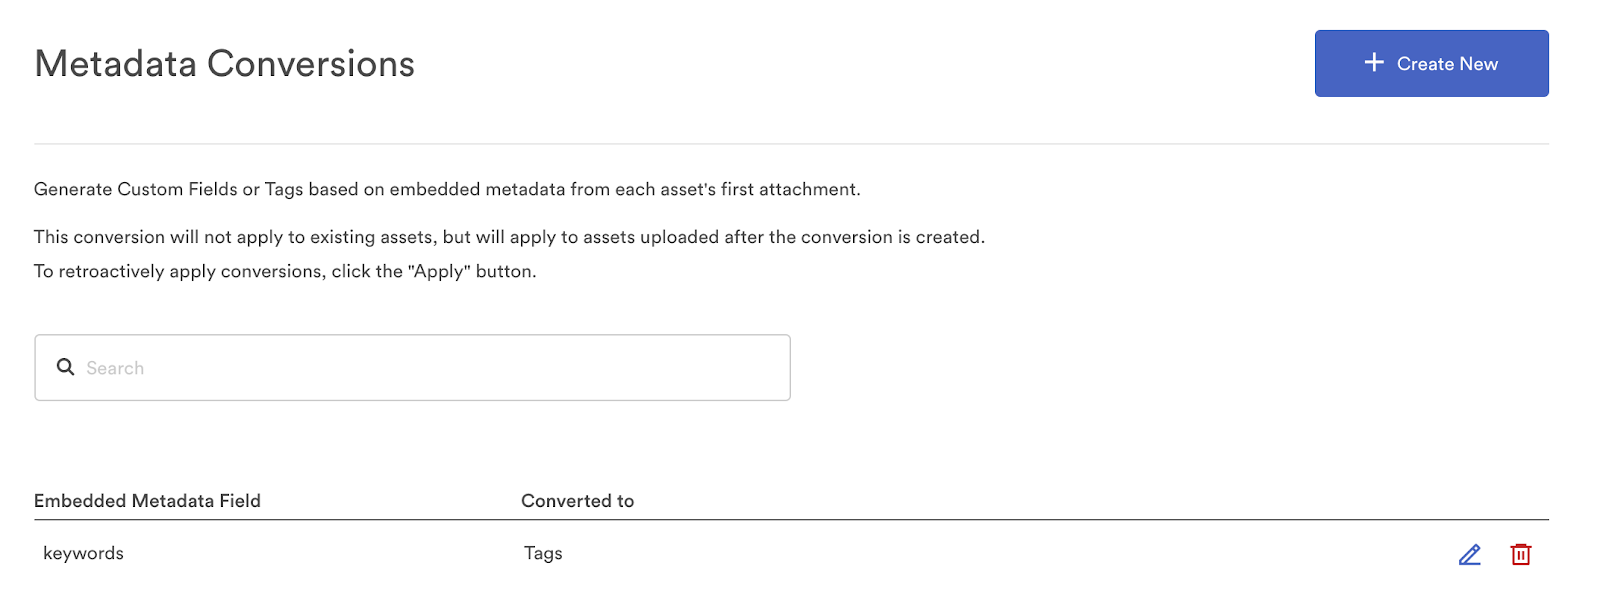 Metadata conversions page with a conversion for keywords converted to tags.